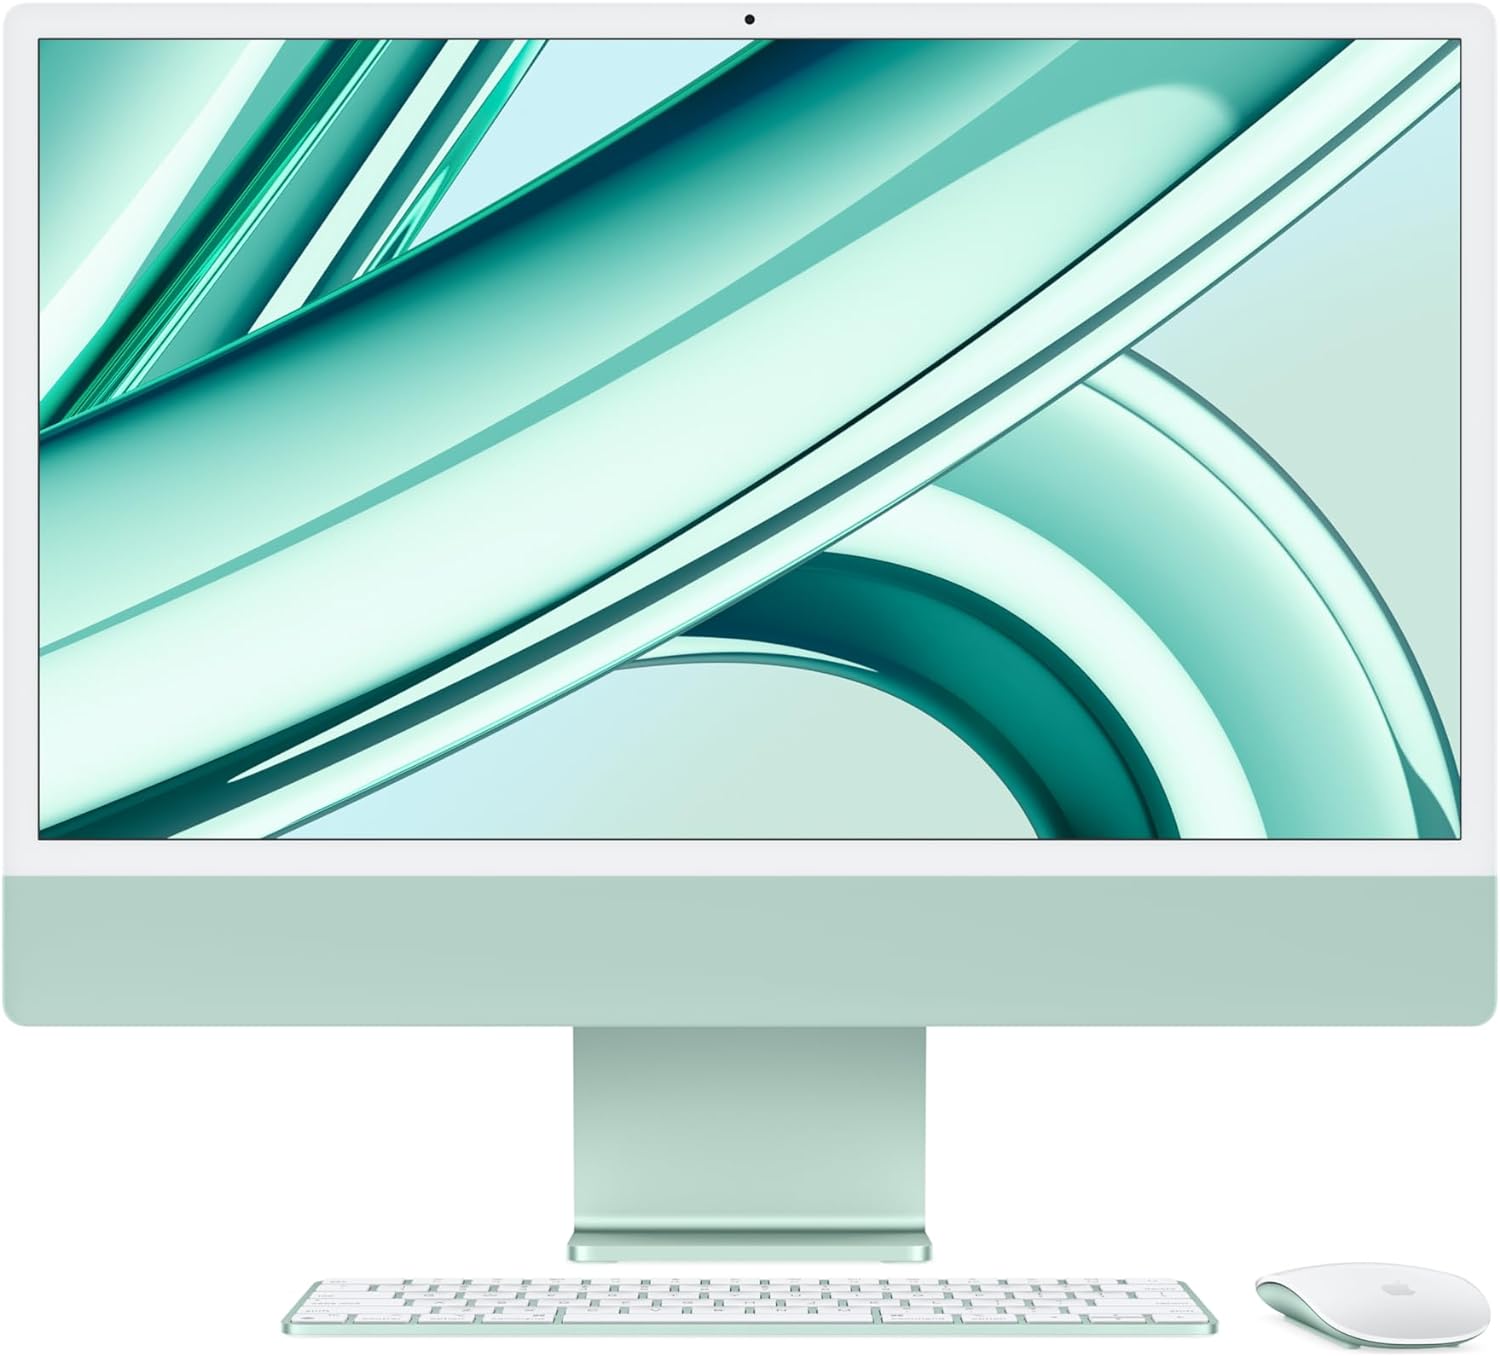 SKU: 0194253776949, Barcode: 194253776949 - Apple 2023 iMac (24-inch) in Green - Supercharged by M3 chip for fast performance in a sleek all-in-one design.